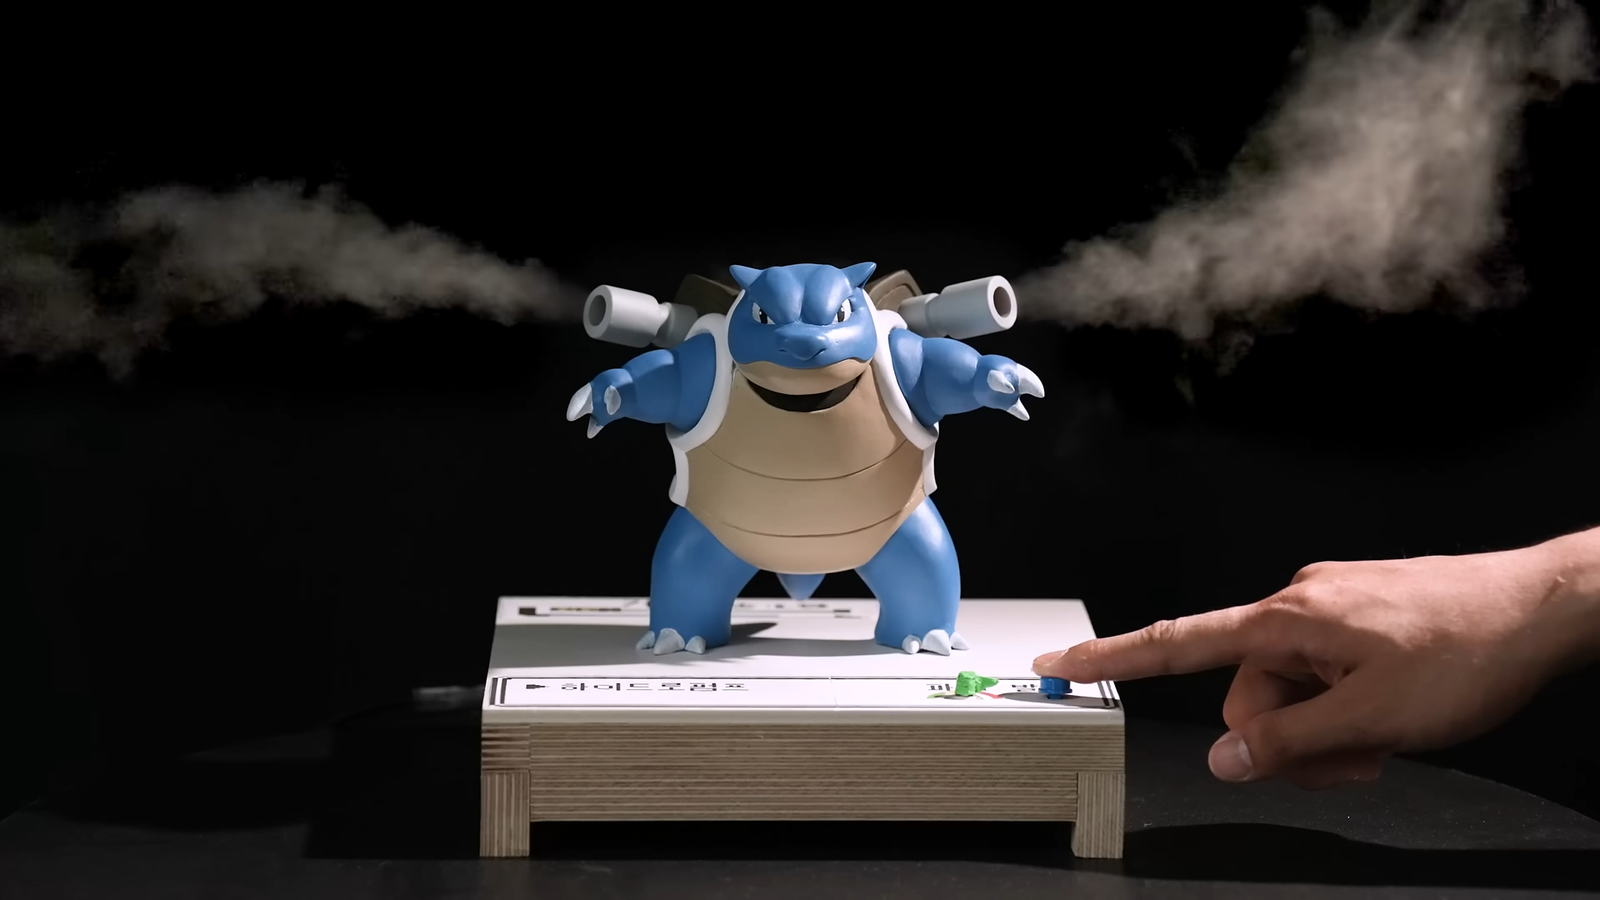 The Blastoise humidifier shows us that you don't need a 3D printer when you're so good with a 3D pen